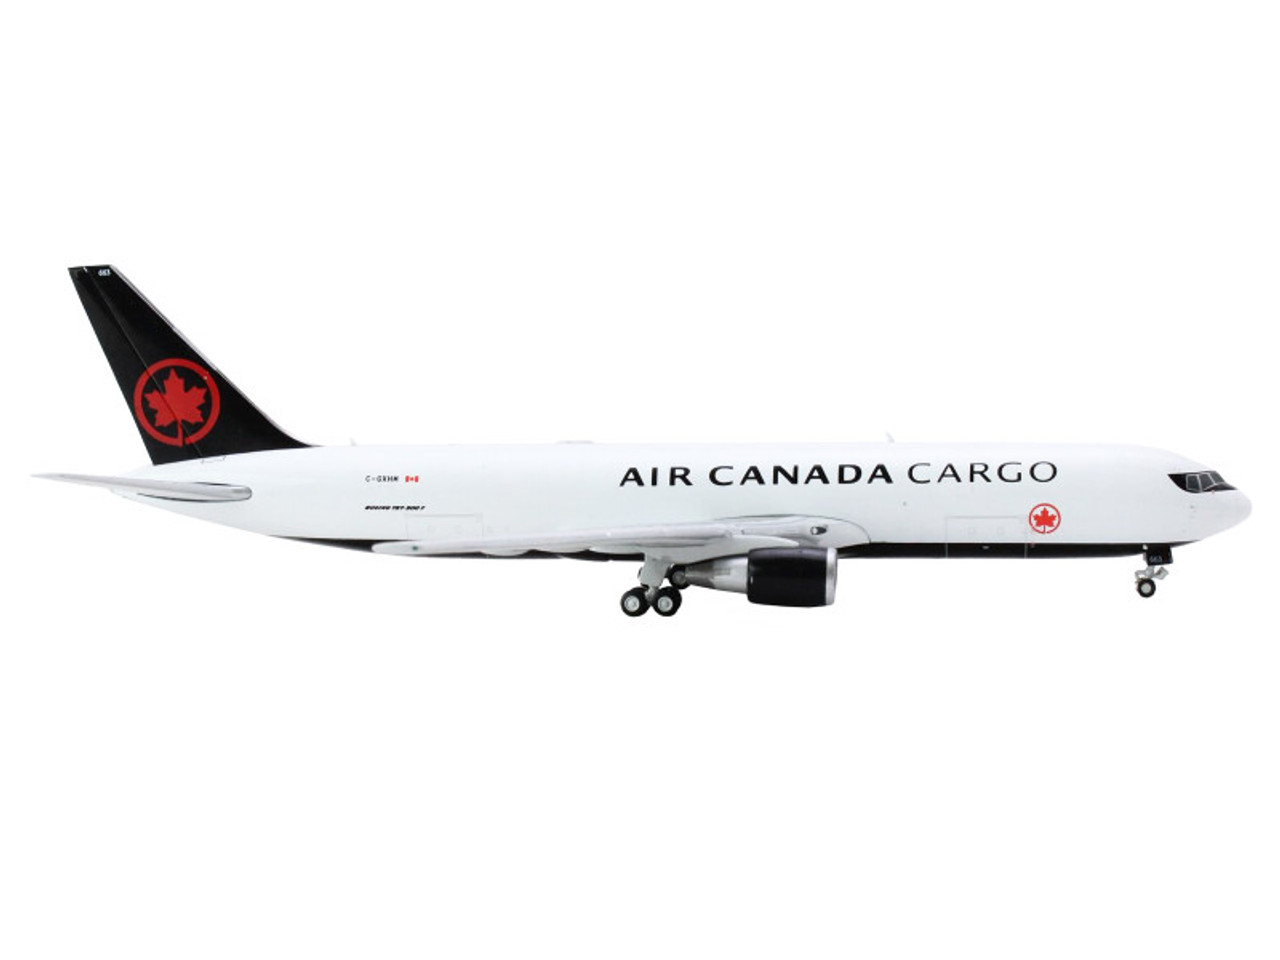 Boeing 767-300F Commercial Aircraft "Air Canada Cargo" (C-GXHM) White with Black Tail 1/400 Diecast Model Airplane by GeminiJets